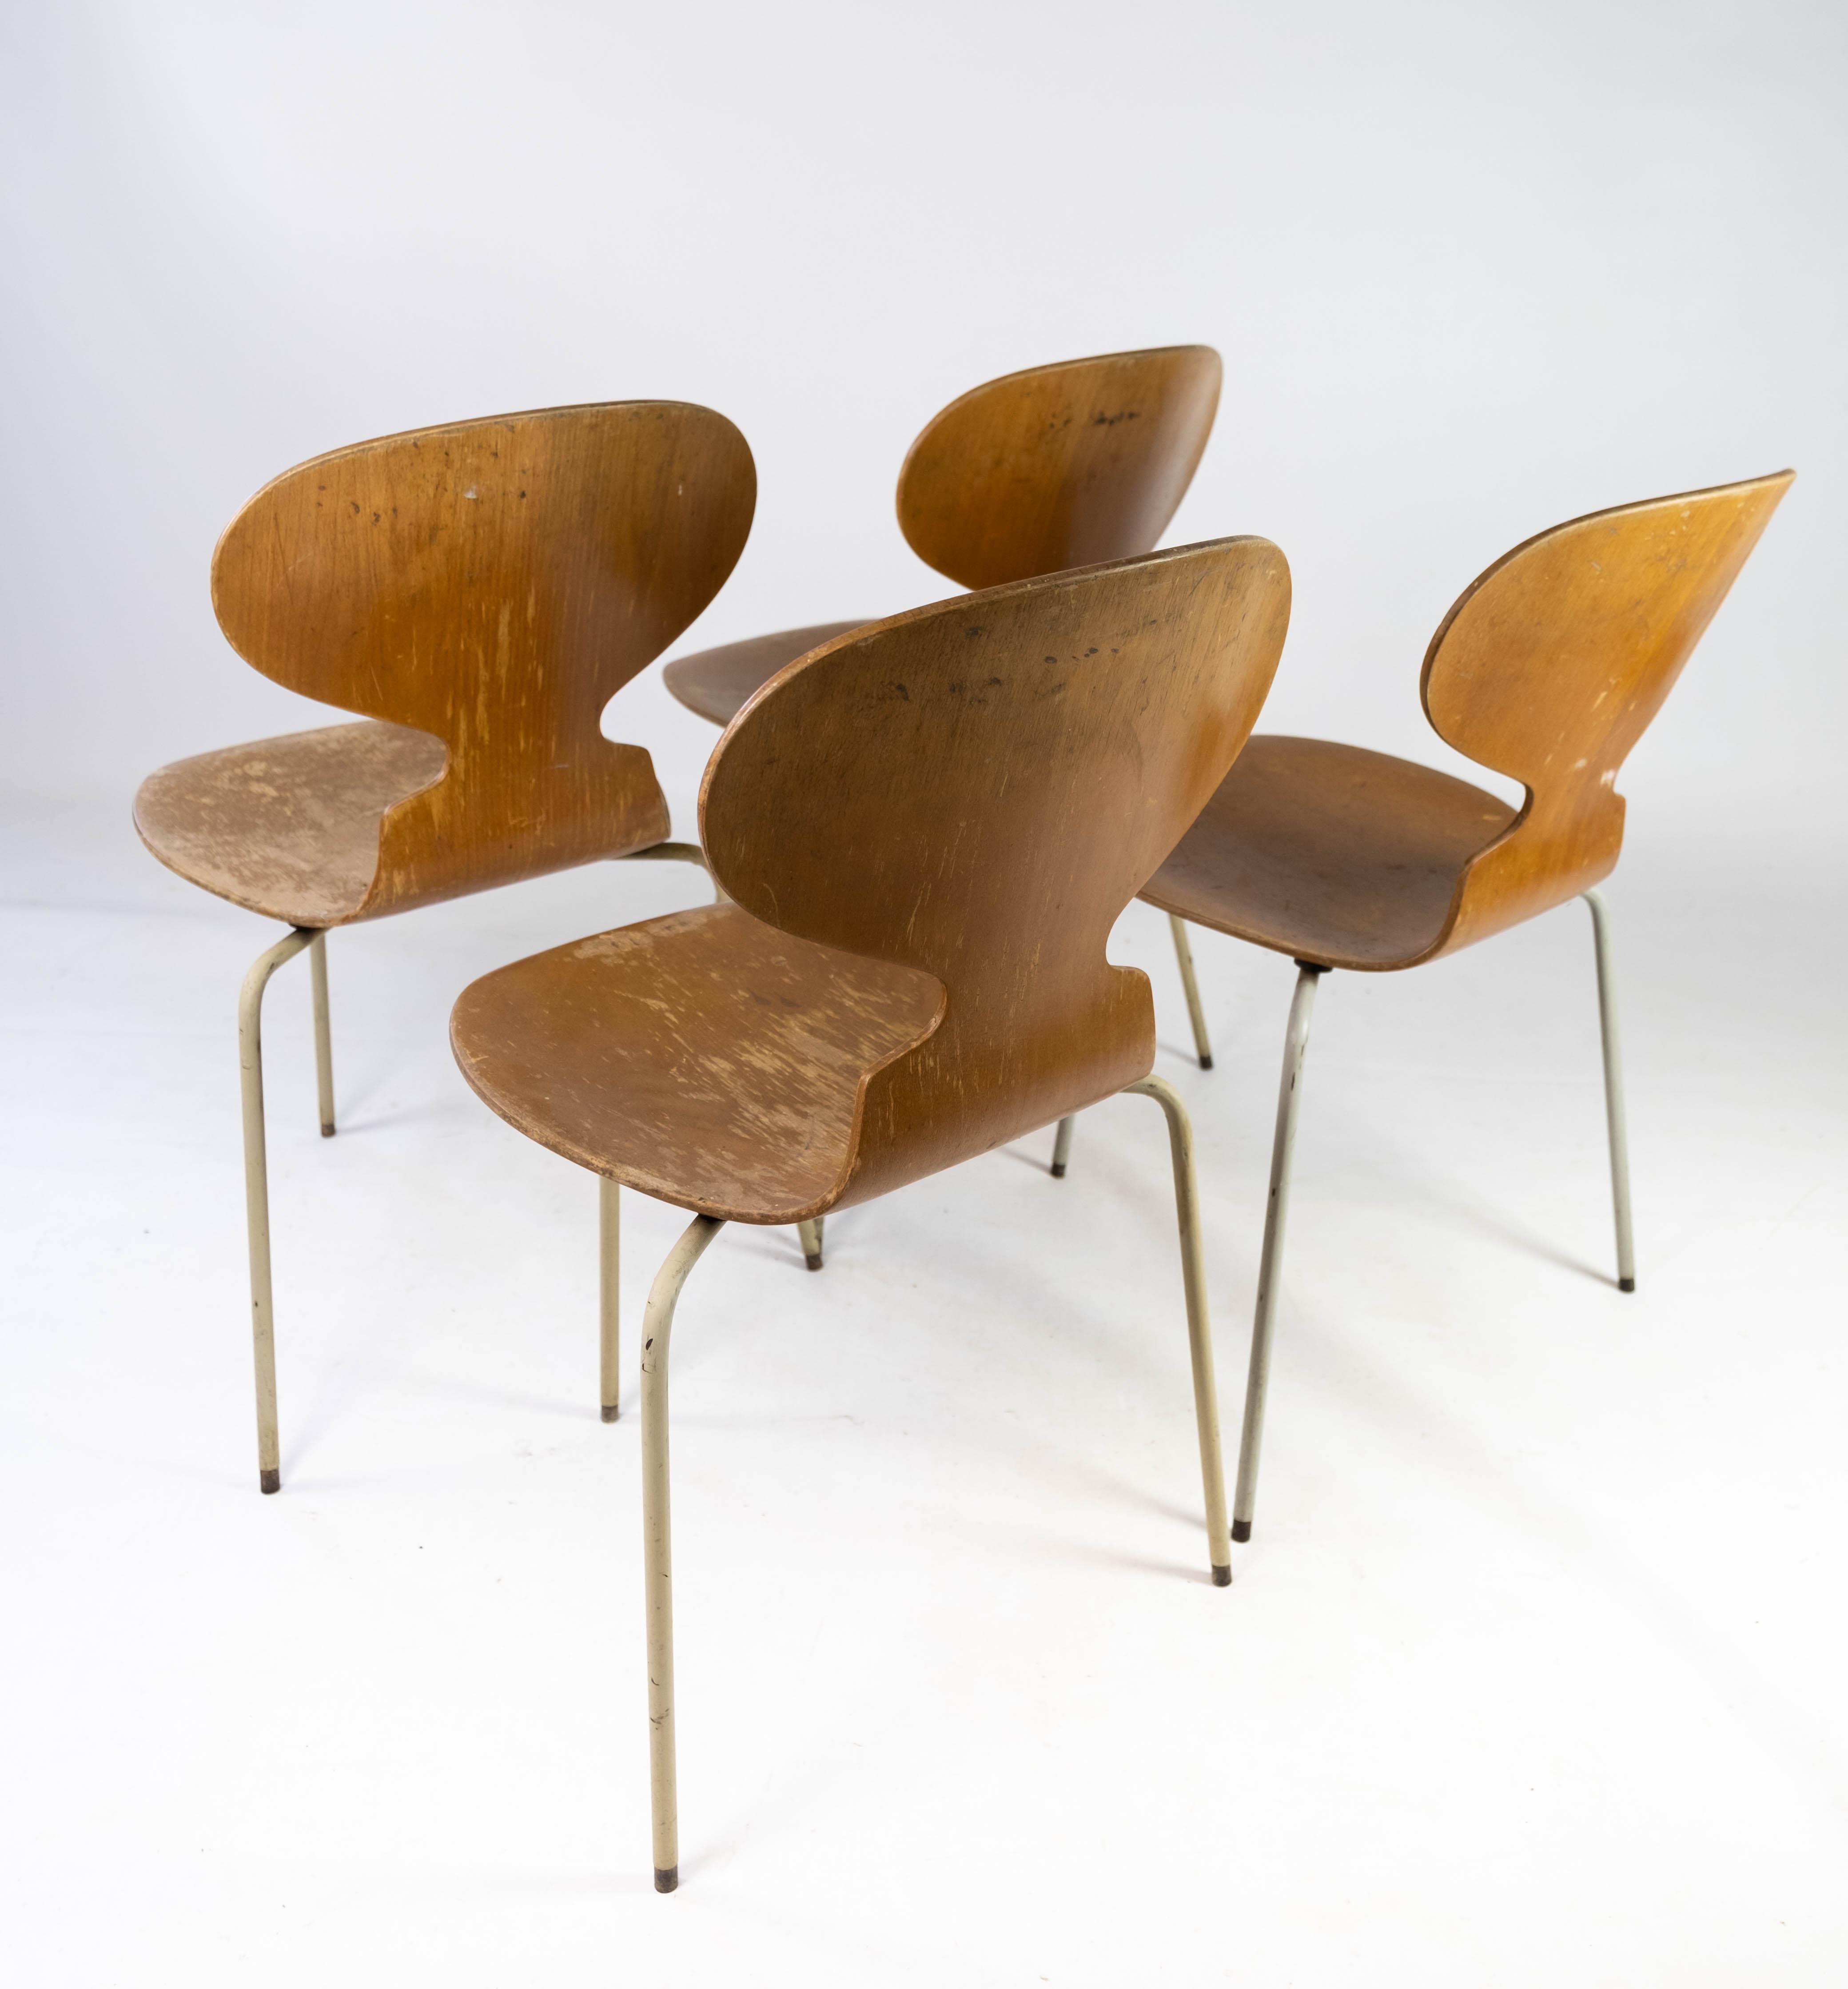 Set of Four Ant Chairs, Model 3101, in Light Wood, by Arne Jacobsen, 1950s For Sale 3